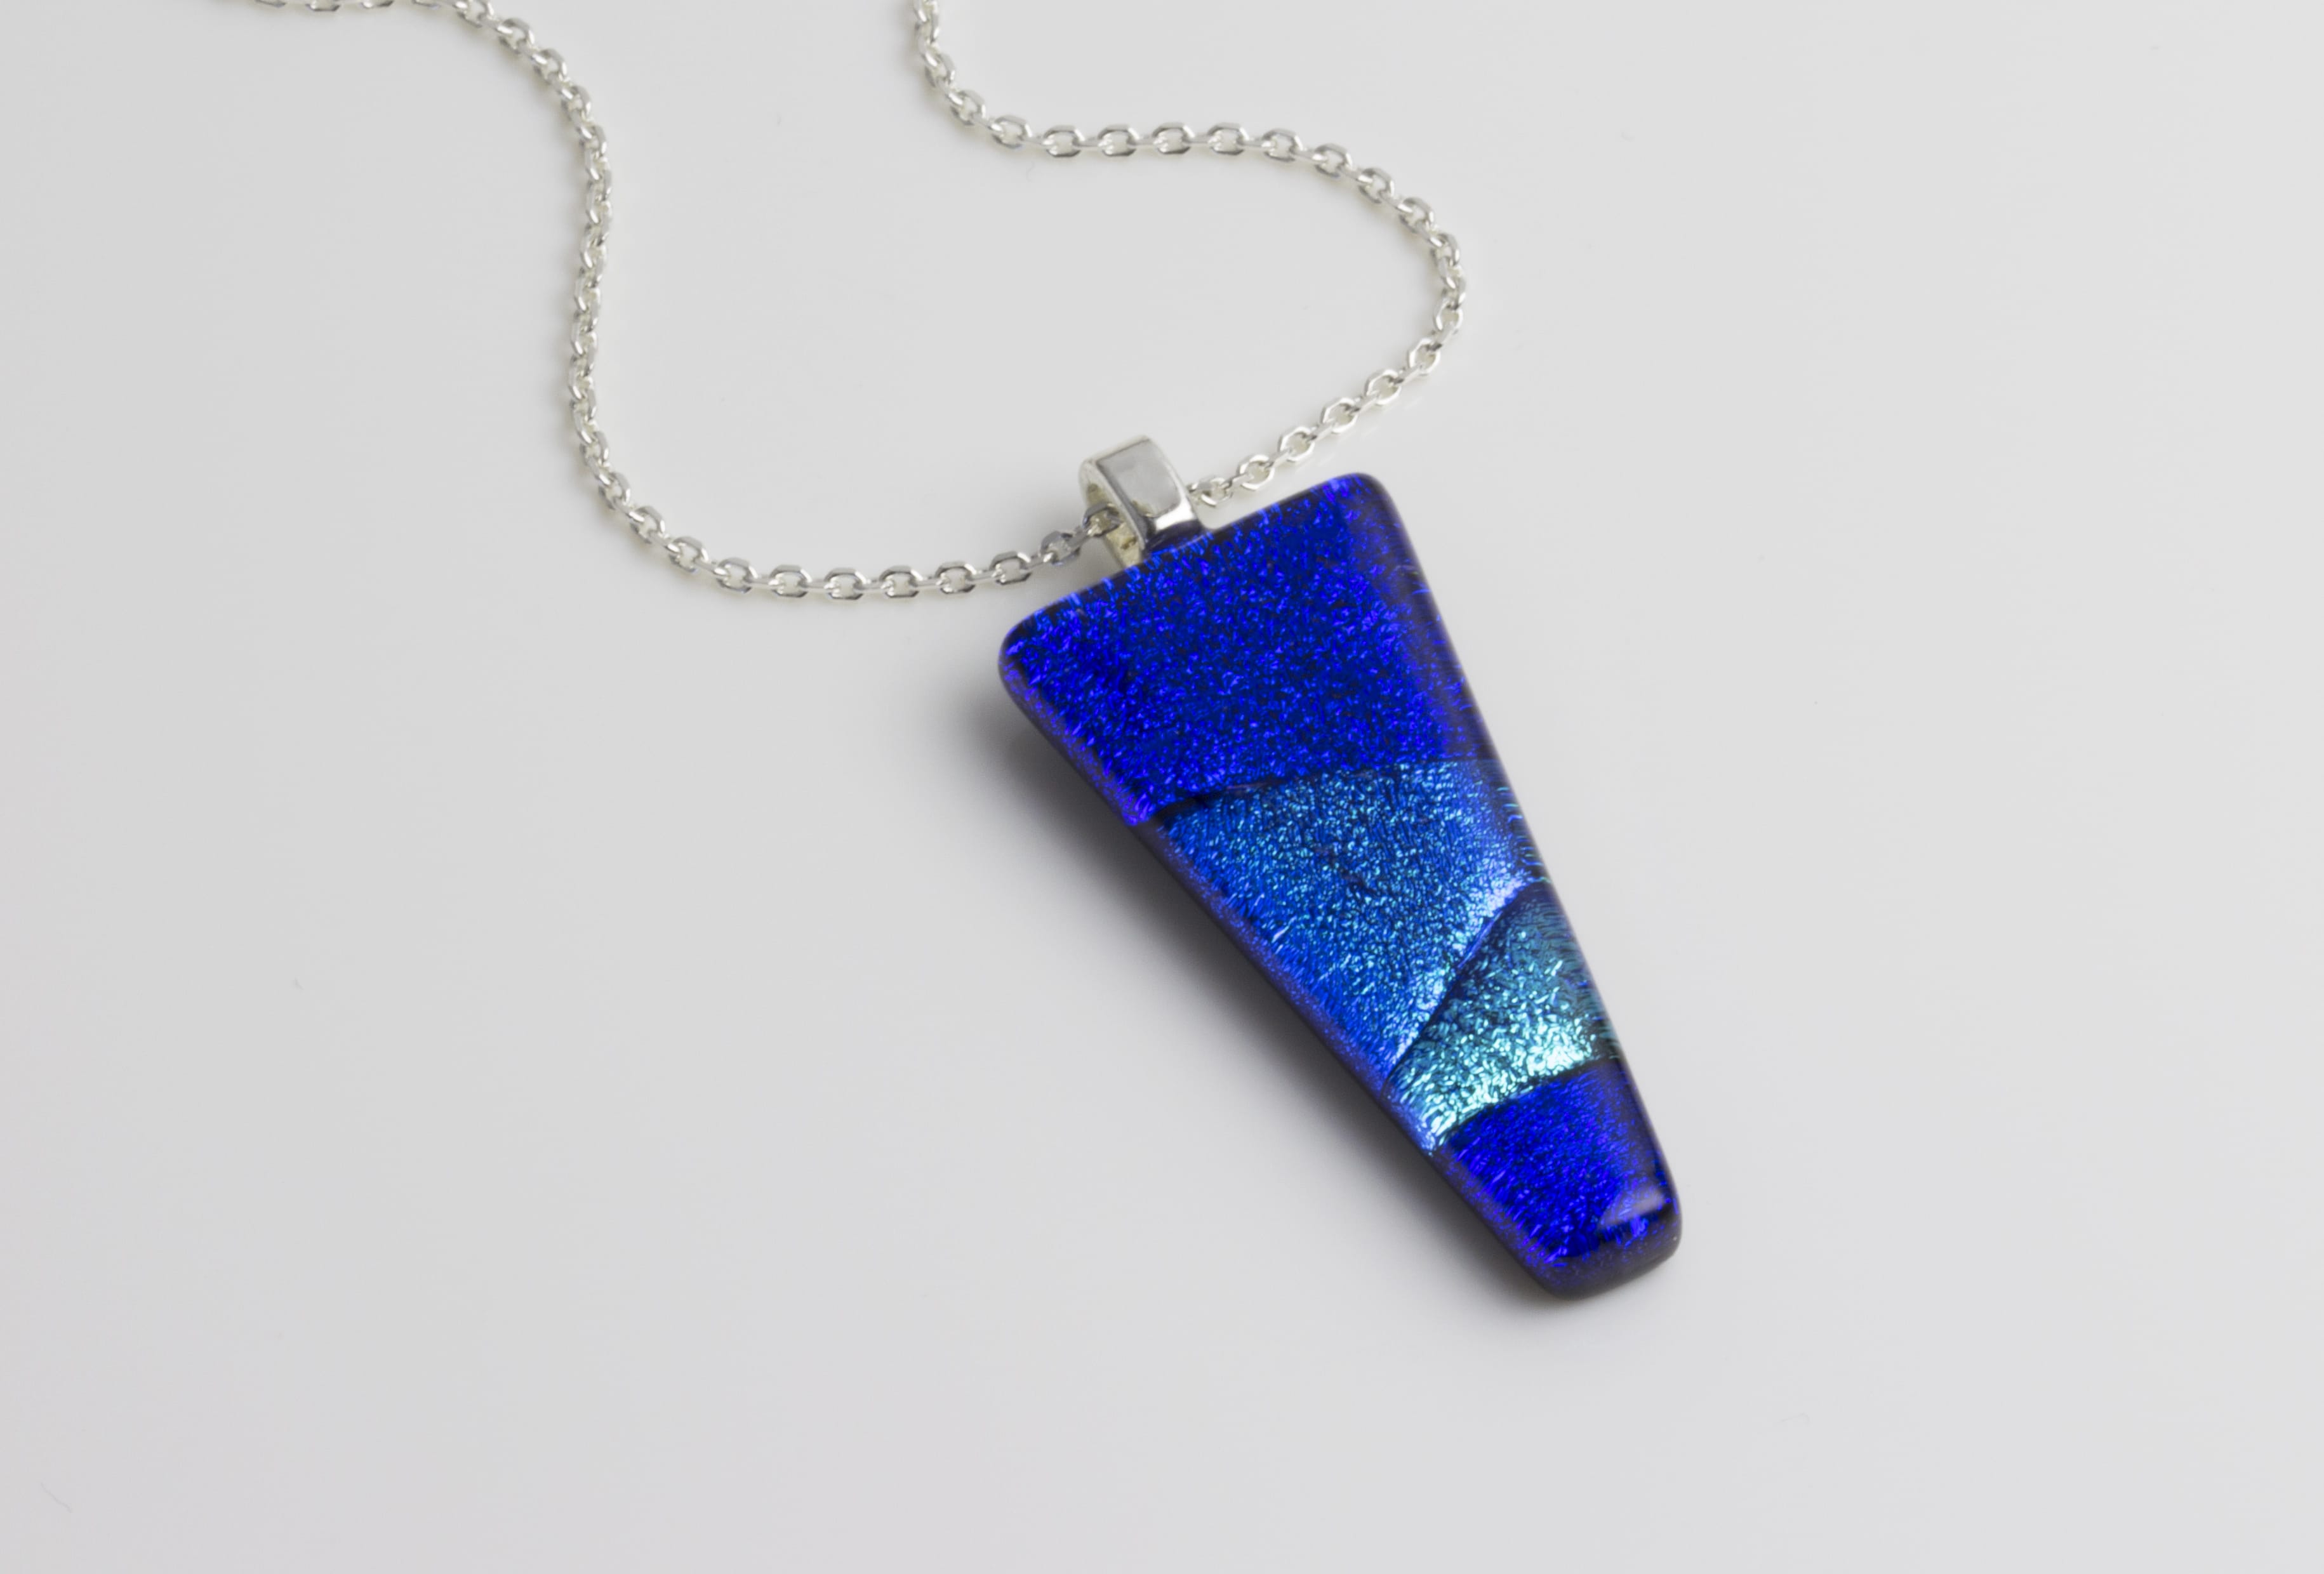 Tapered pendant in 3 tones of blue